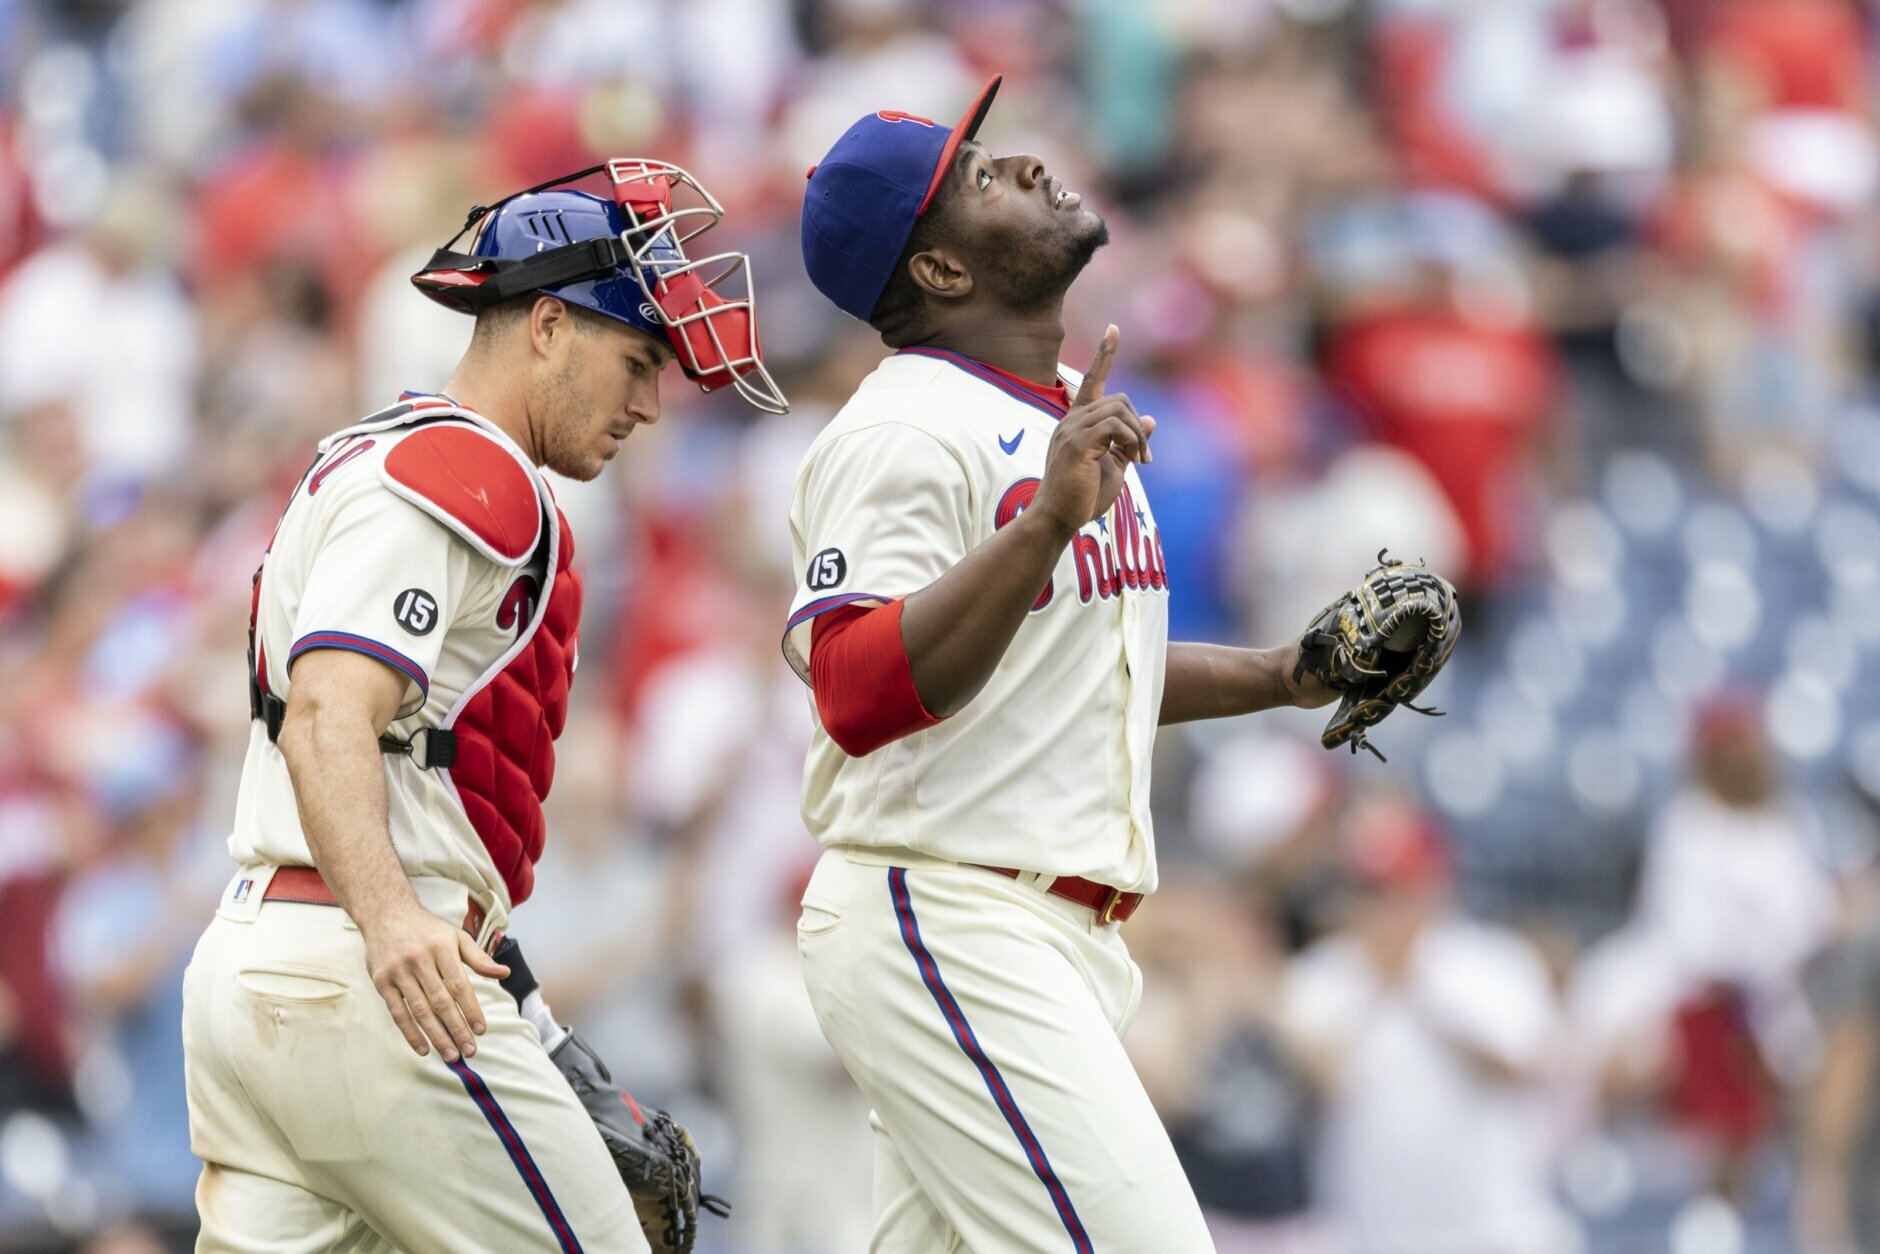 Realmuto’s big day helps Phils take care of Marlins WTOP News